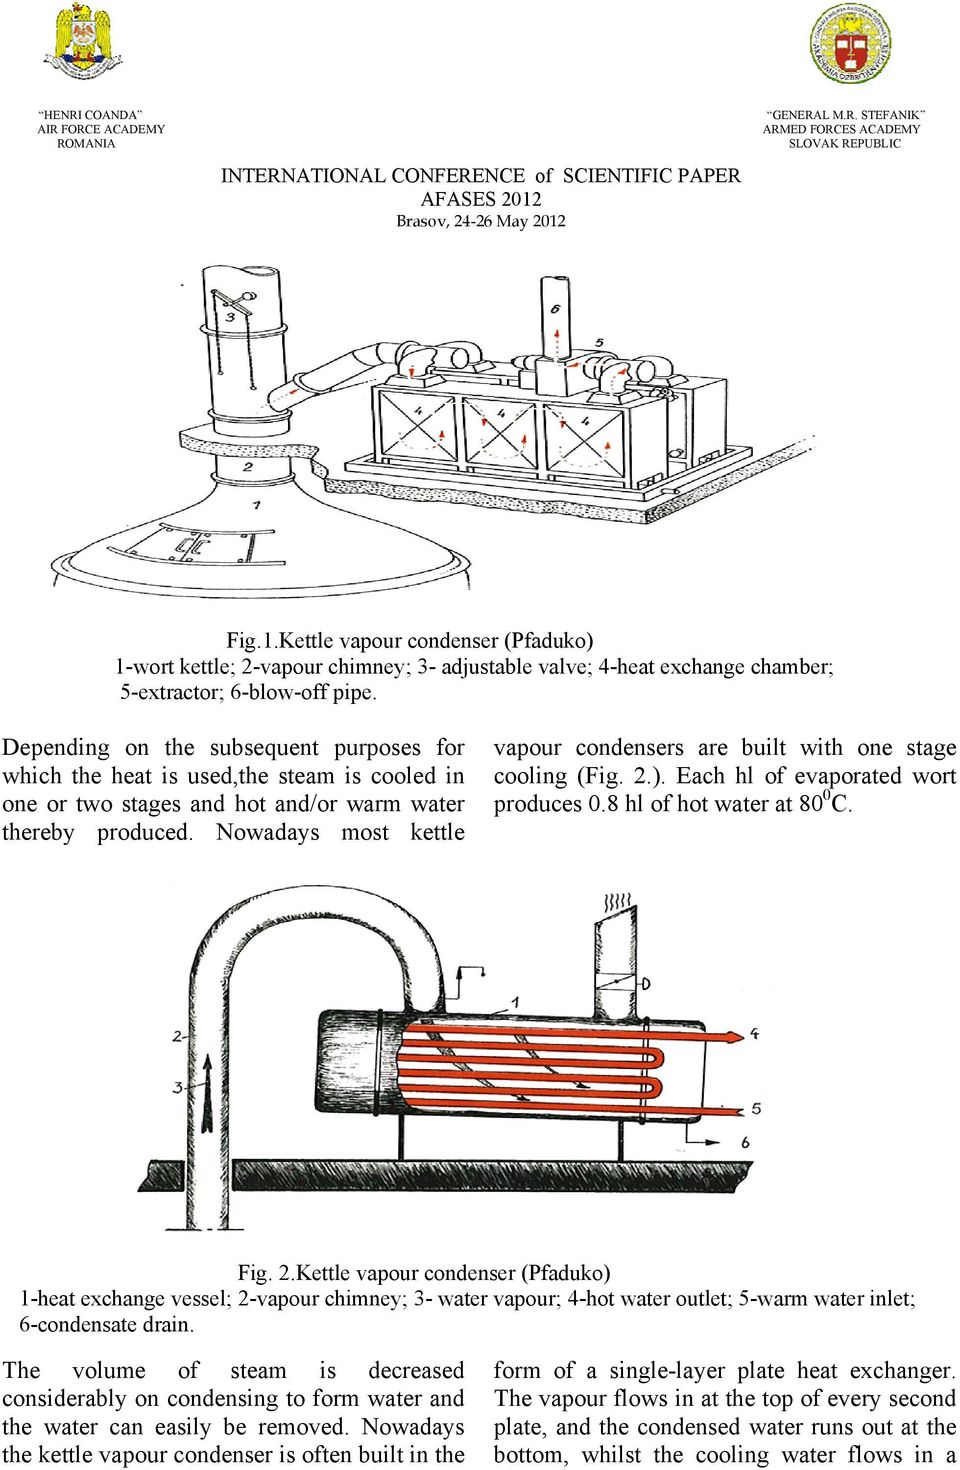 Nowadays most kettle vapour condensers are built with one stage cooling (Fig. 2.